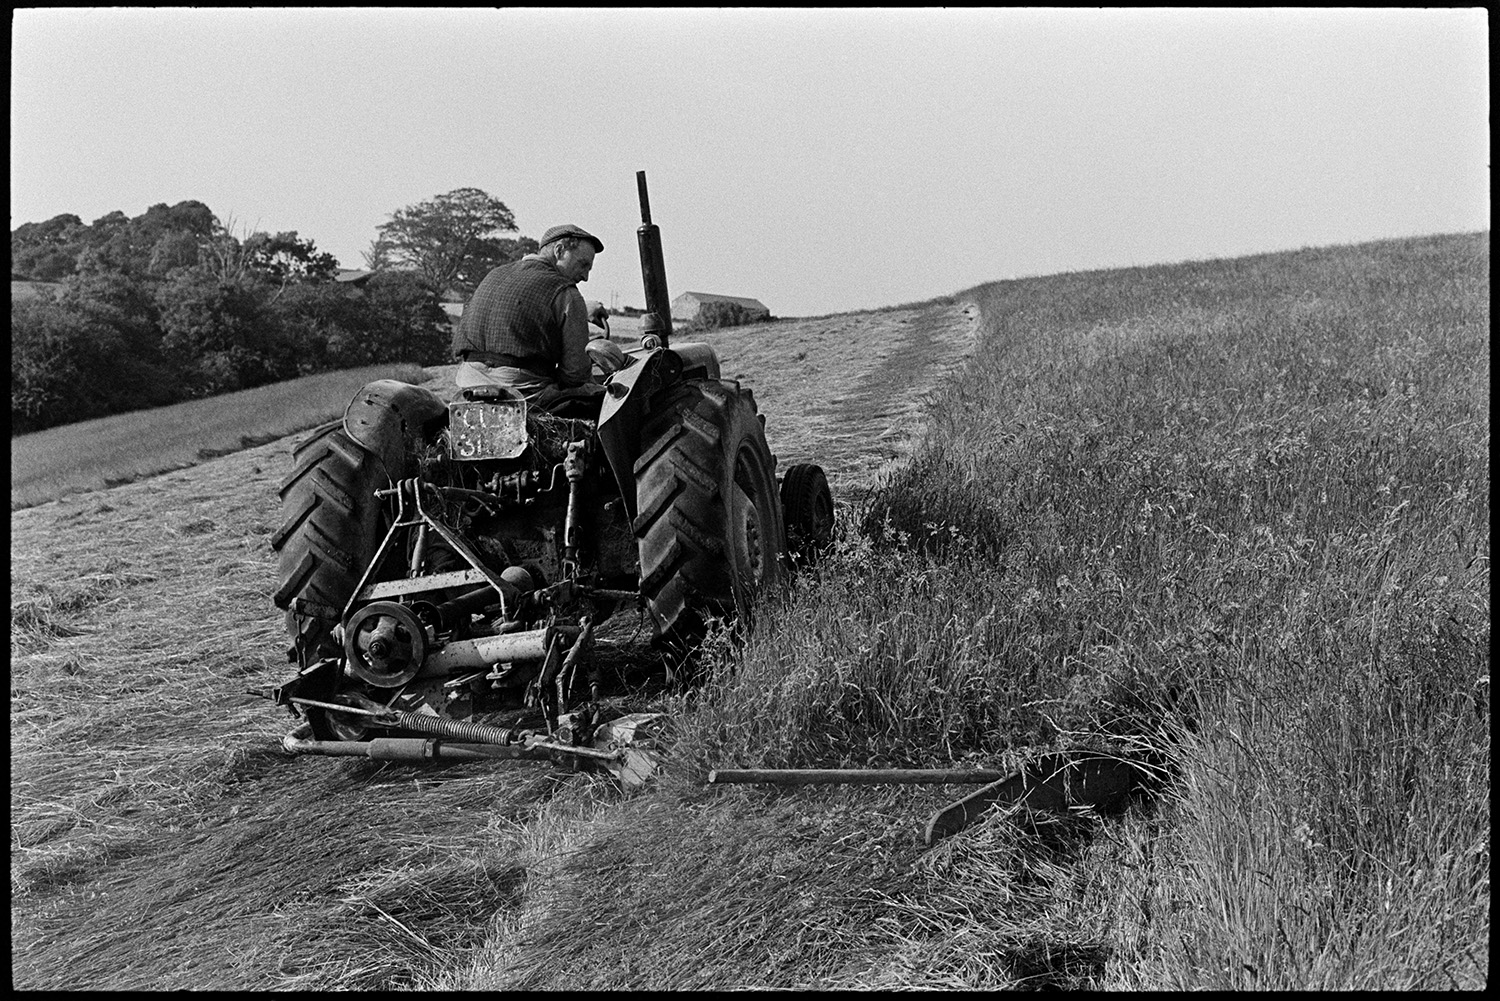 Farmer cutting grass, mowing. 
[George Ayre cutting grass with a tractor and mower in a field at Ashwell, Dolton.]